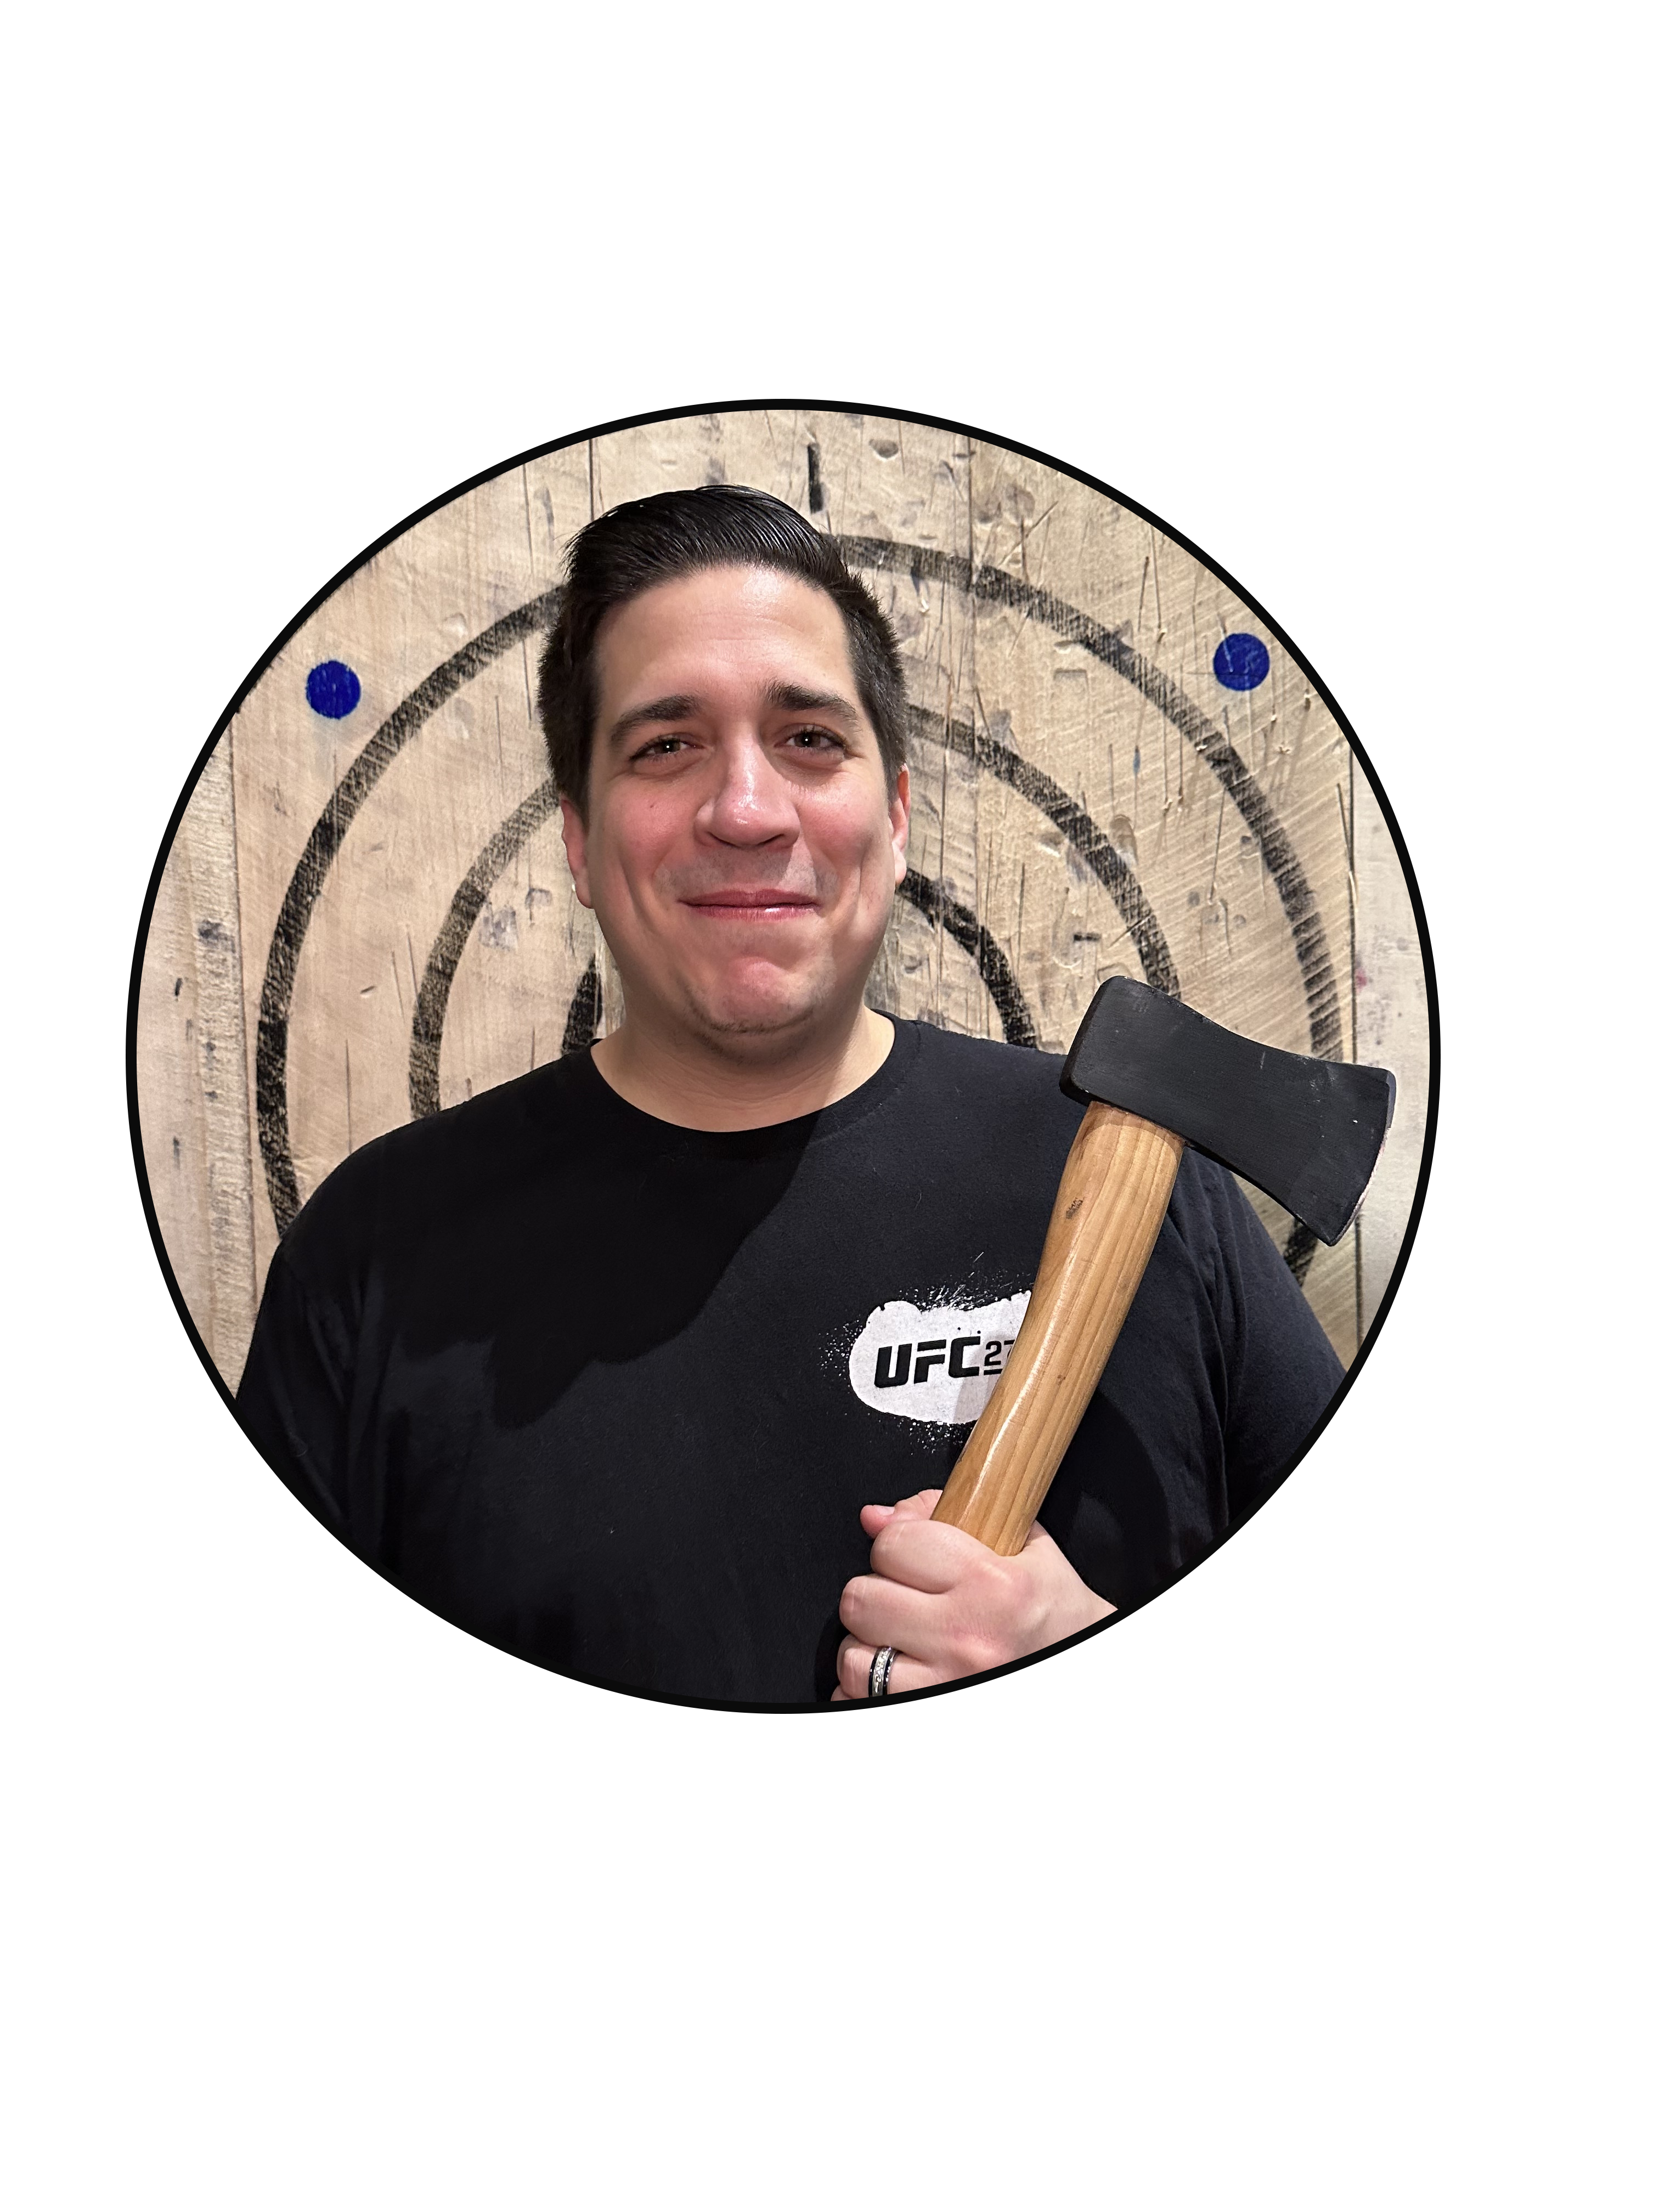 A happy man standing in front of a wooden target holding a throwing axe